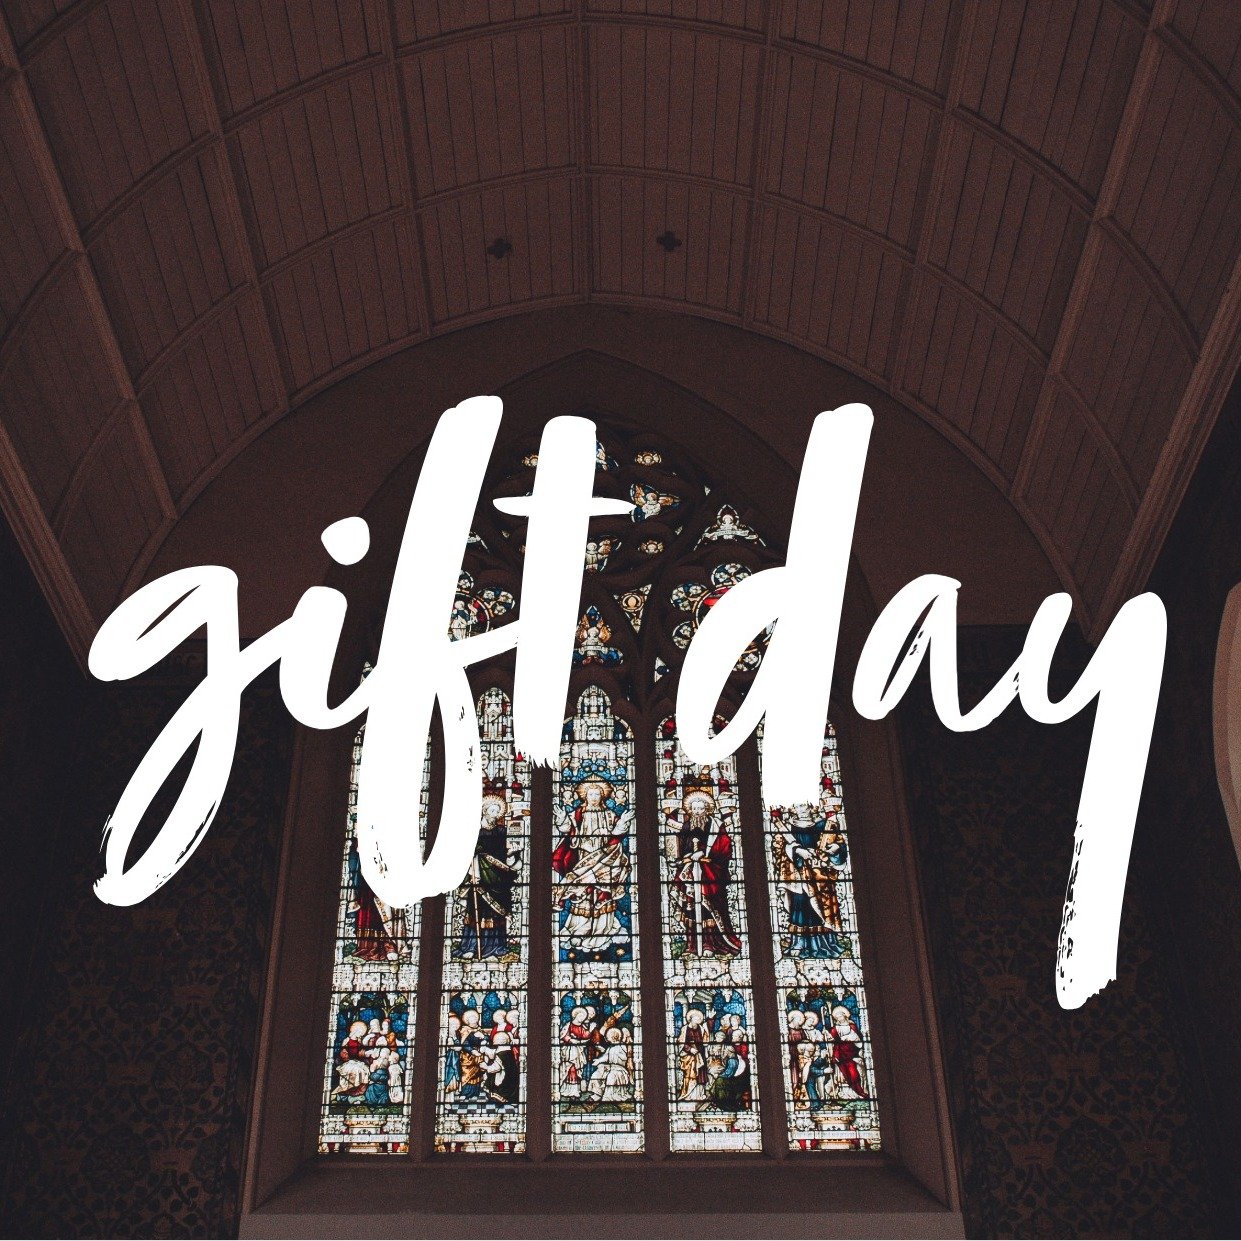 This Sunday 28th April, is Gift Day. Each year we take some time to reflect on the vision of our church &amp; what God has called us to as his disciples, and hold Gift Day as a response.

As we approach this gift day, we'd love to ask you to consider